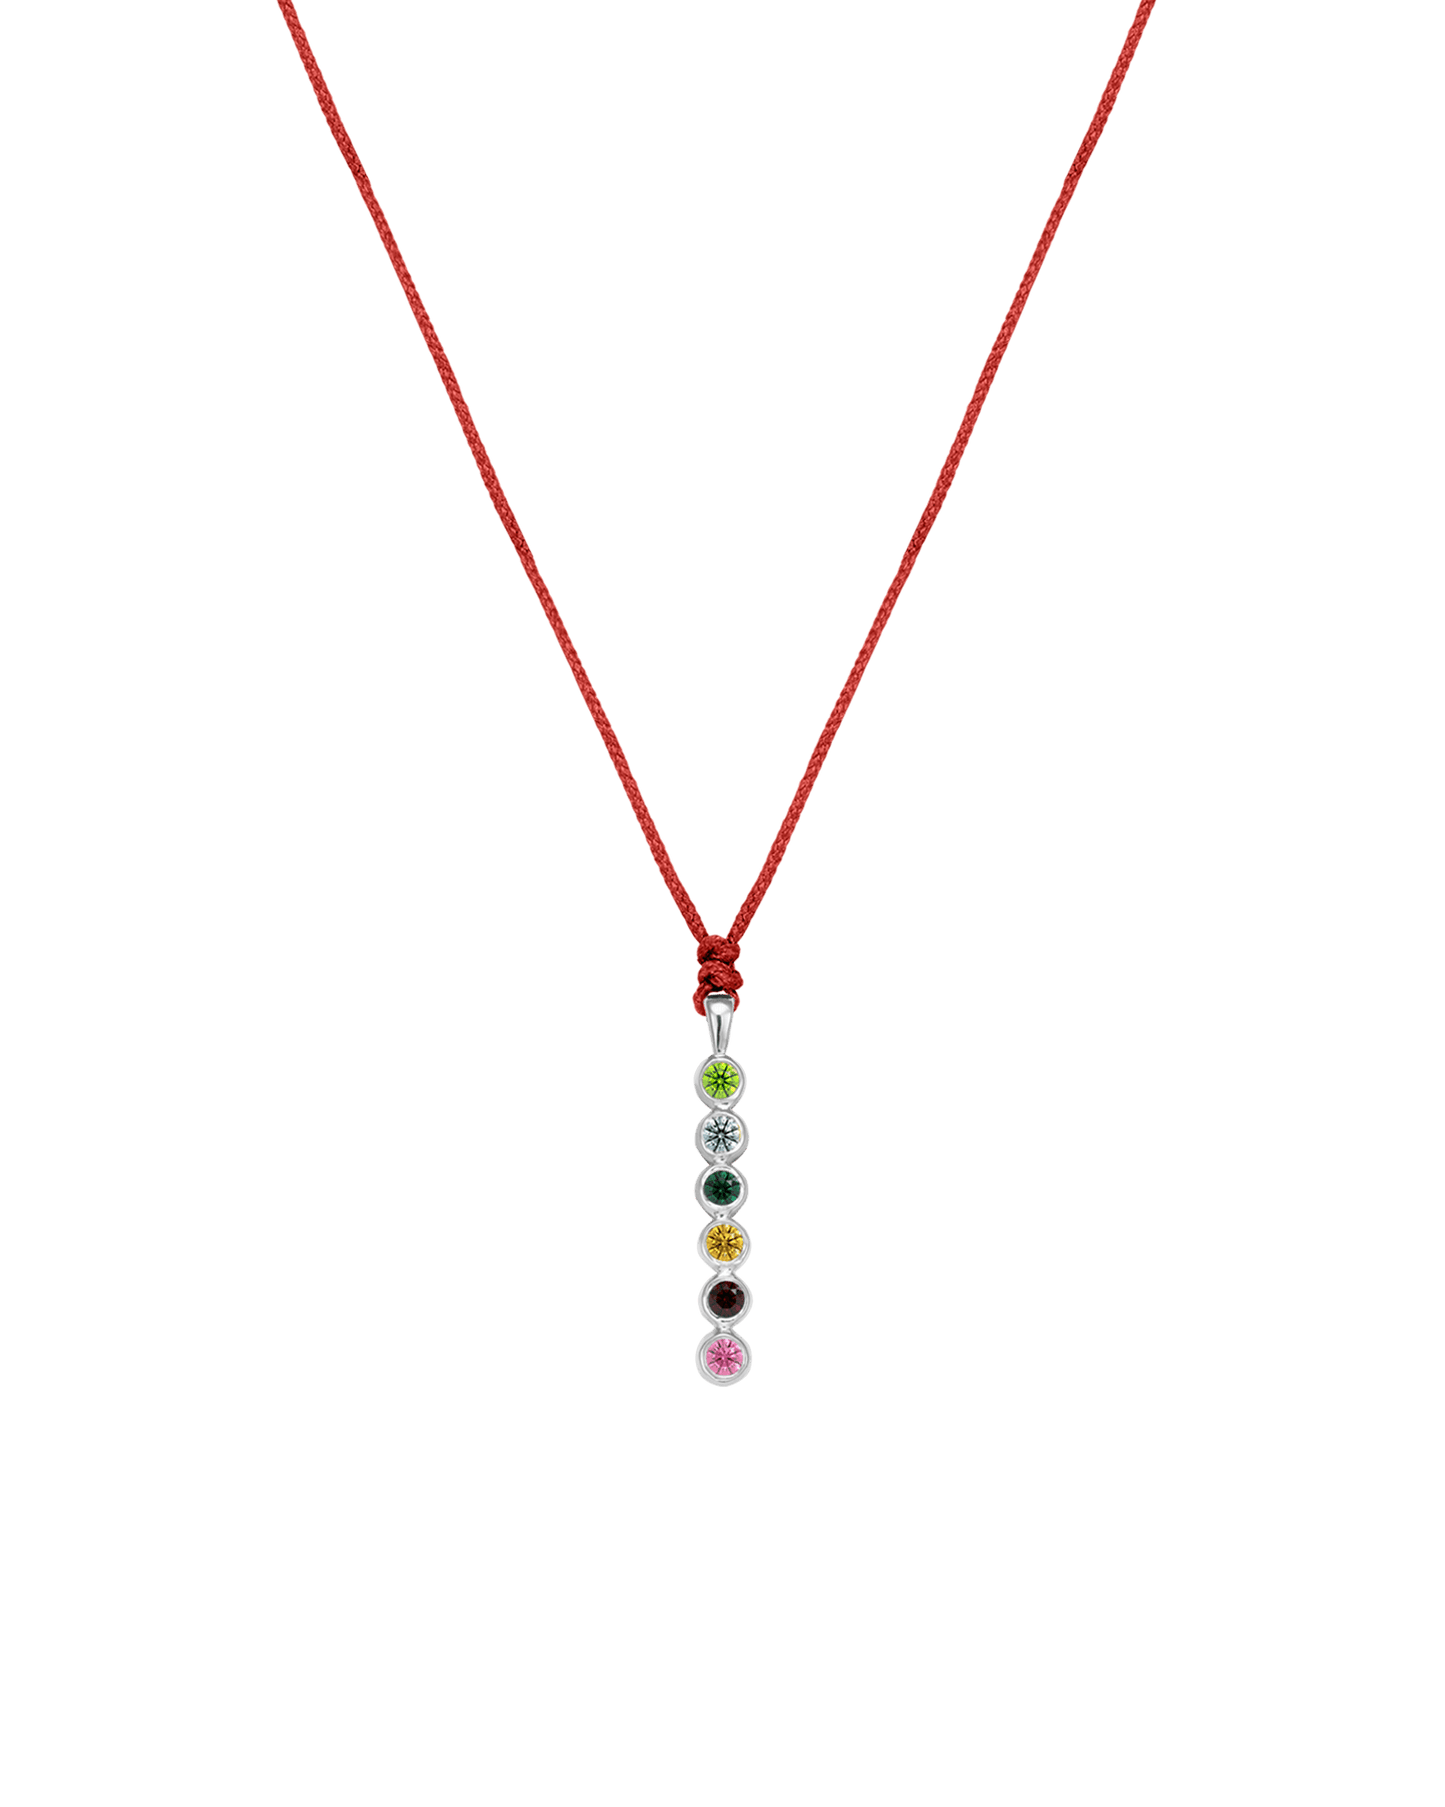 The Birthstones Bar Necklace - 14K White Gold Necklaces 14K Solid Gold Red 2 